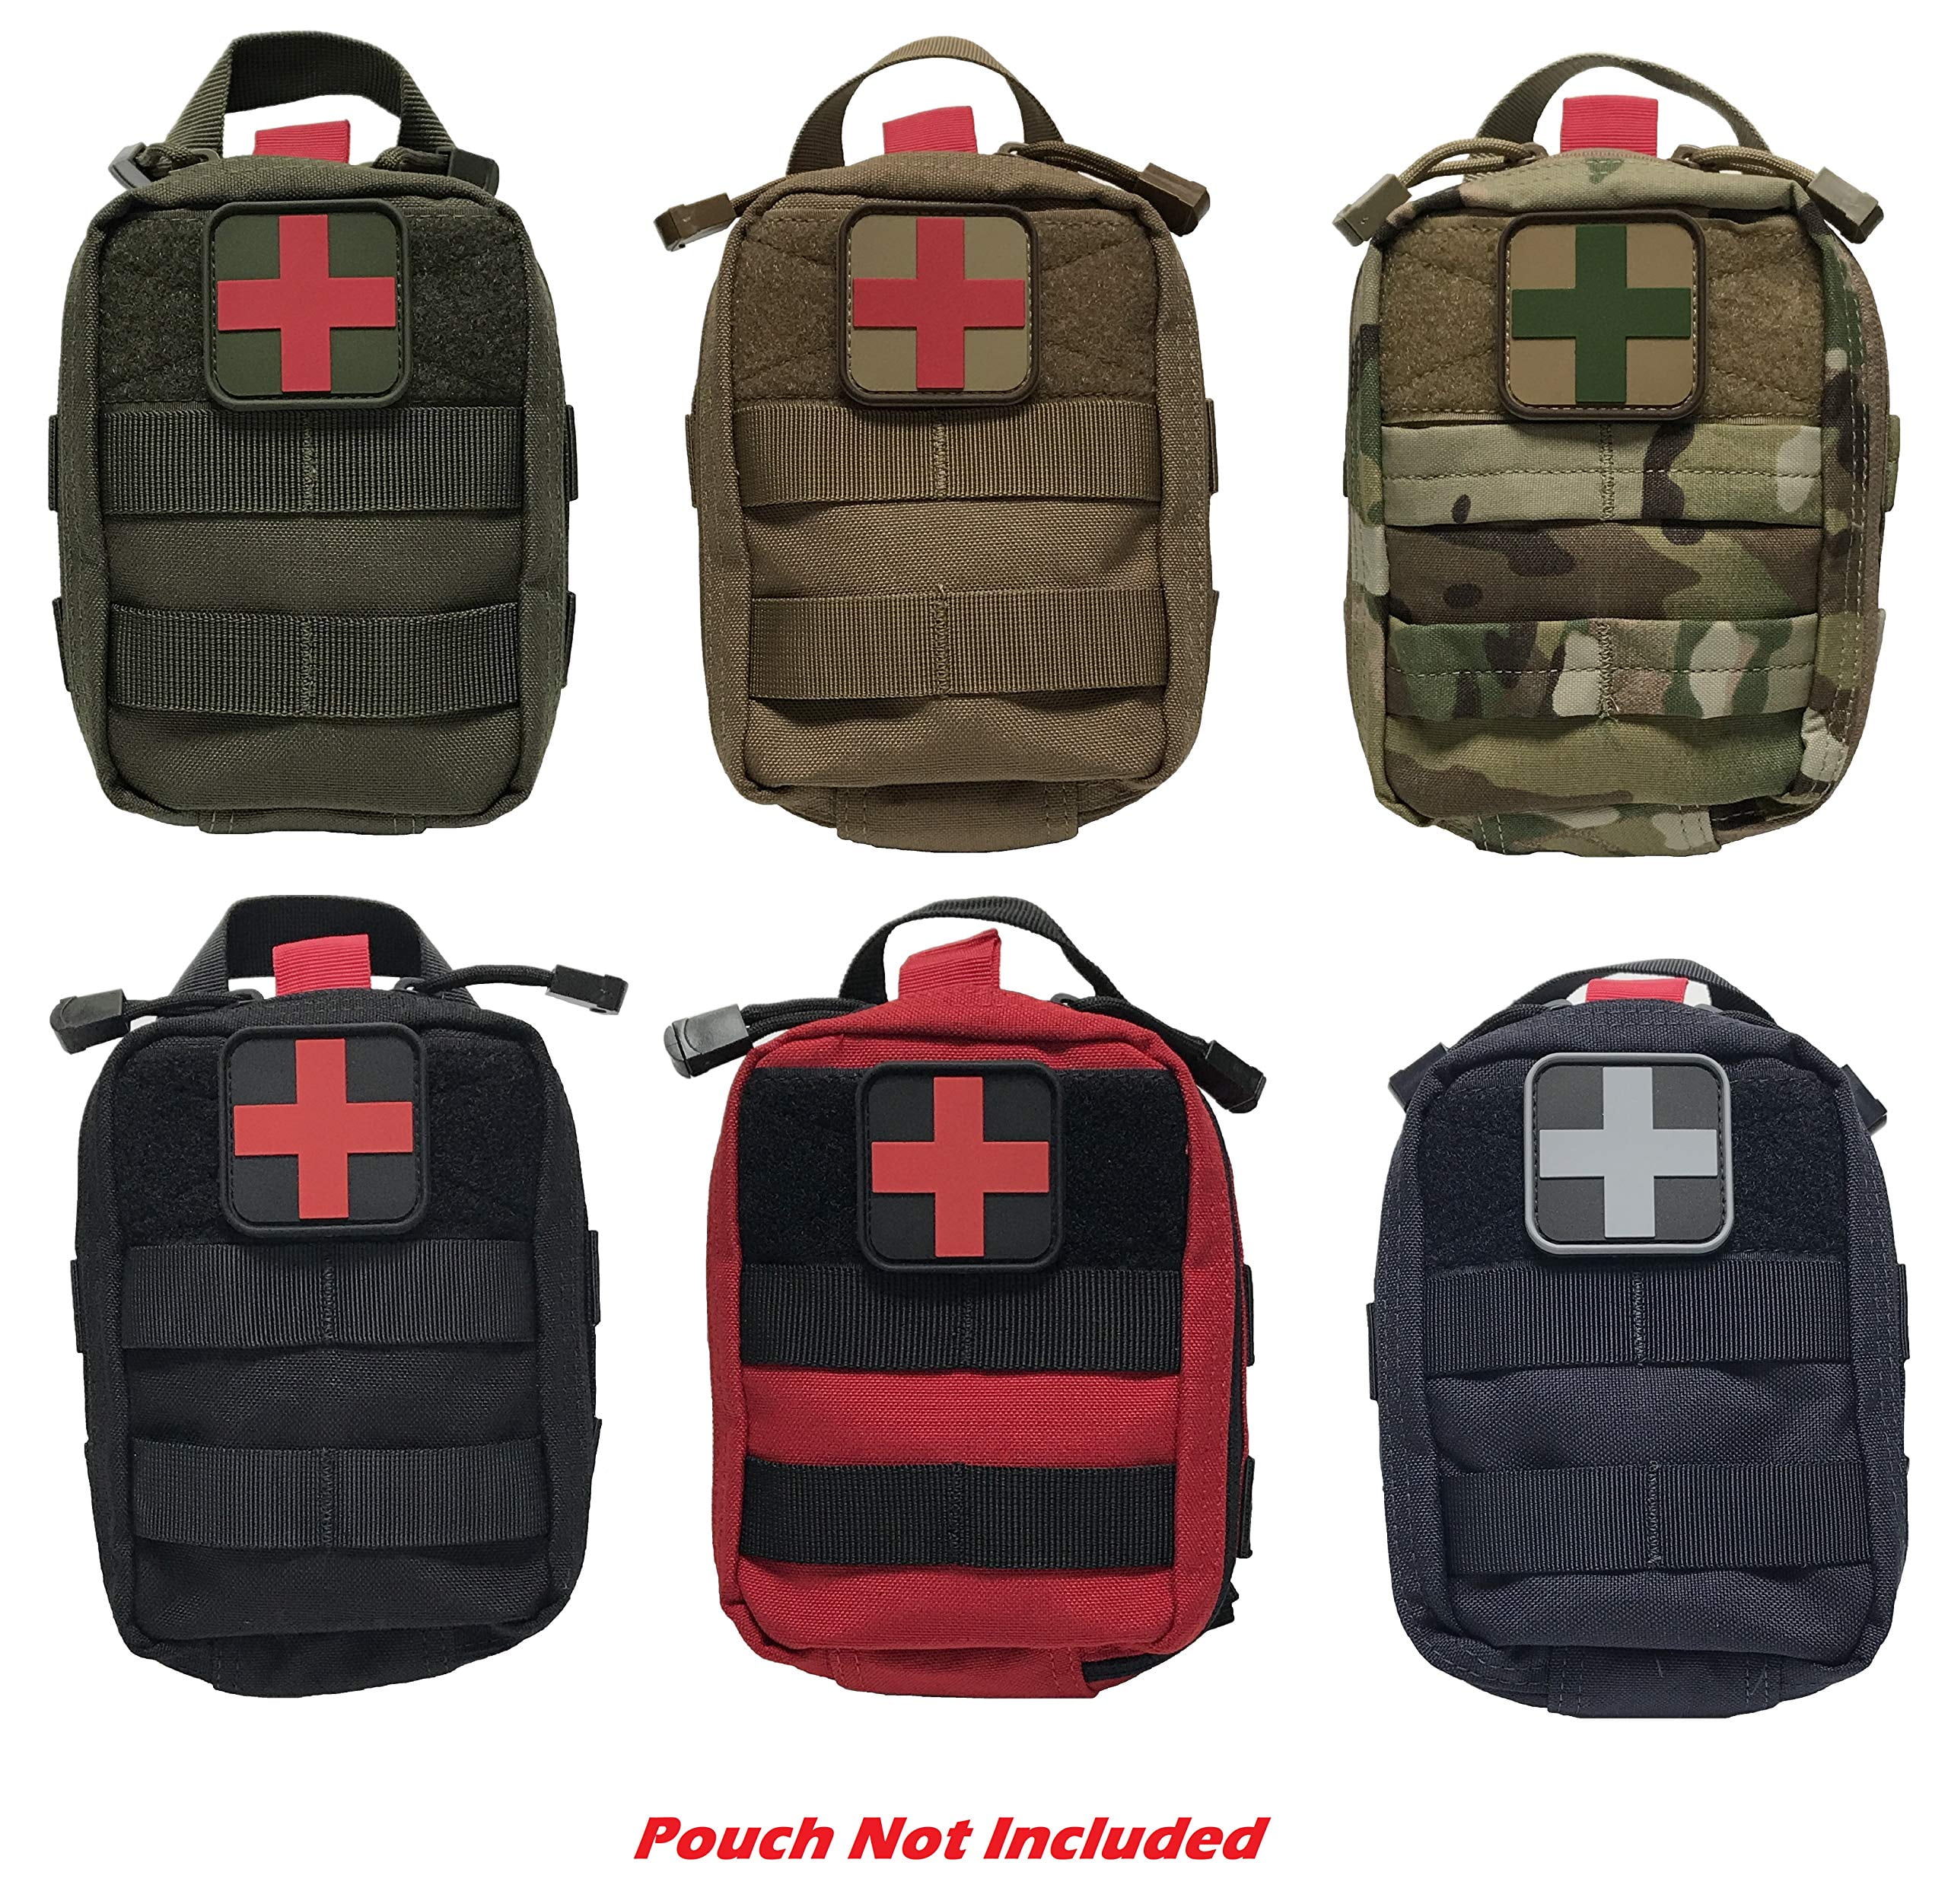 Medic Red Cross Patch, First Aid Morable Patch Perfect for Tactical IFAK,  EMT Trauma Pouch 1.5-Inch 3D High Relief Patch Nurse Doctor Emergency 6 Pcs